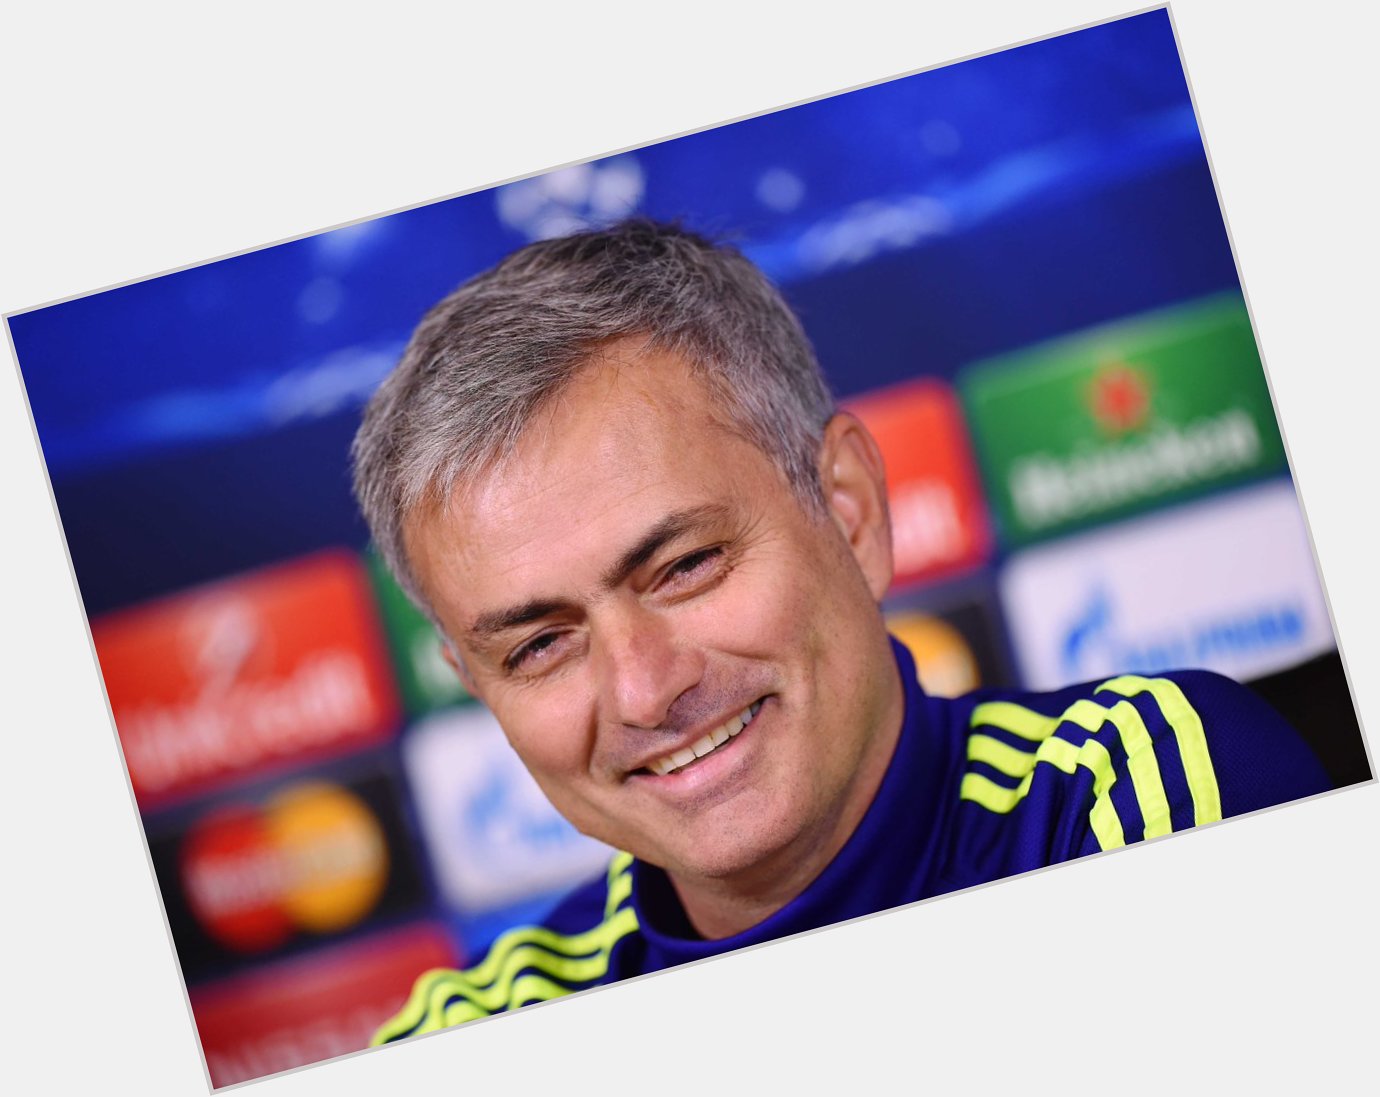 Happy 52nd birthday to Chelsea boss José Mourinho. He\s won 7 league titles across 4 different countries. Impressive! 